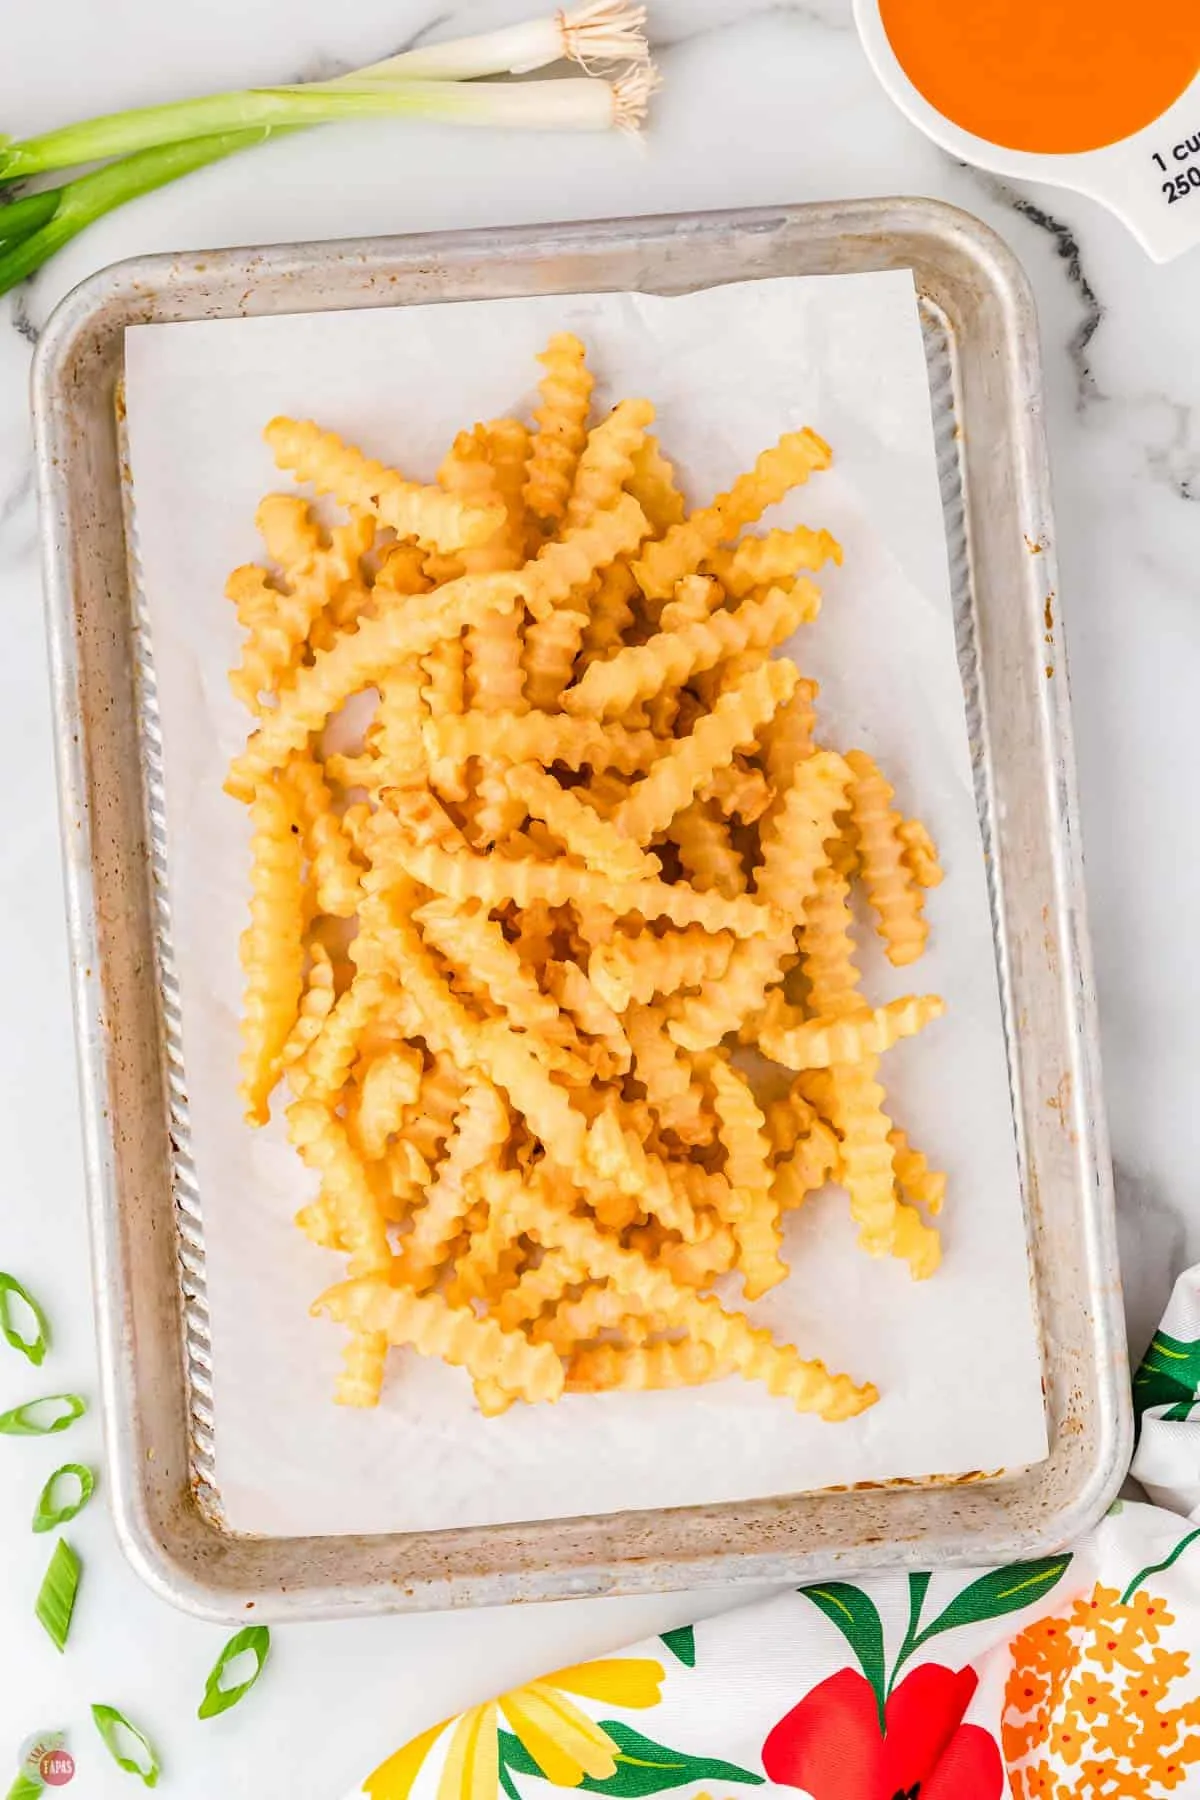 baked french fries